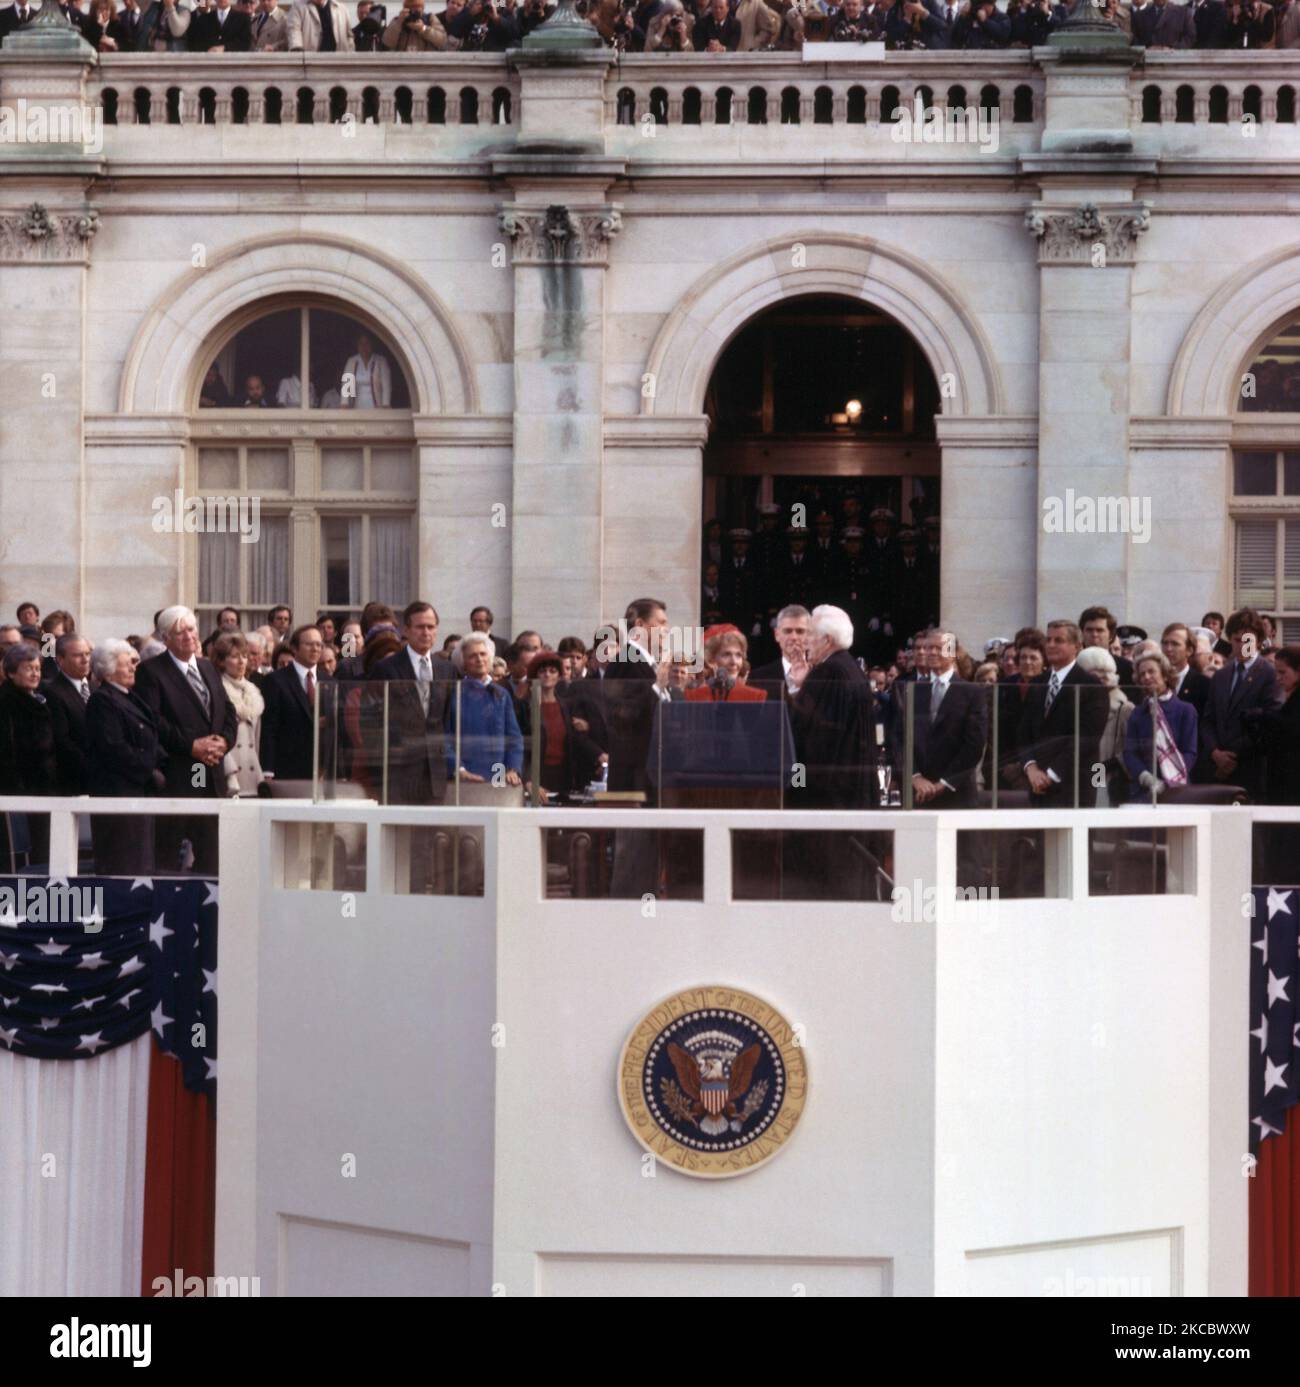 President Ronald Reagan taking the oath of office in front of the U.S. Capitol building. Stock Photo